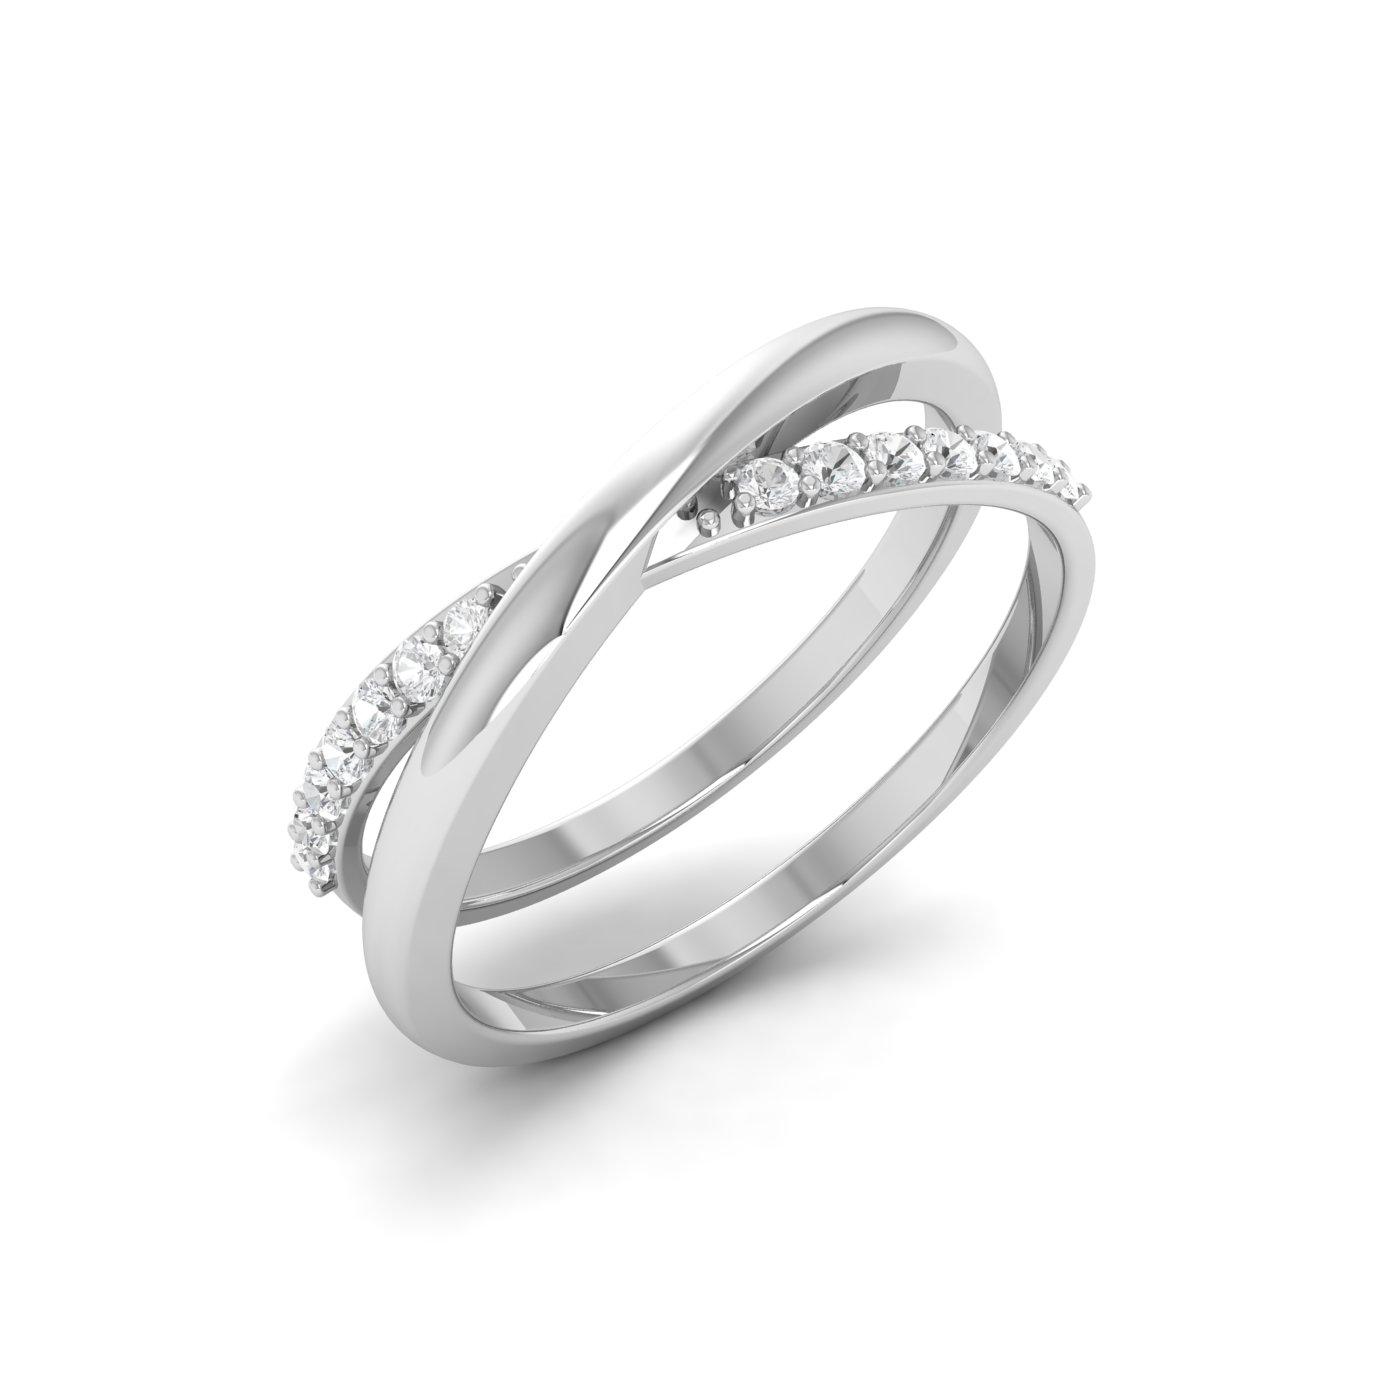 || A Guide to Choose the Best Wedding Band For Solitaire Ring || Dual Layered Diamond band ||